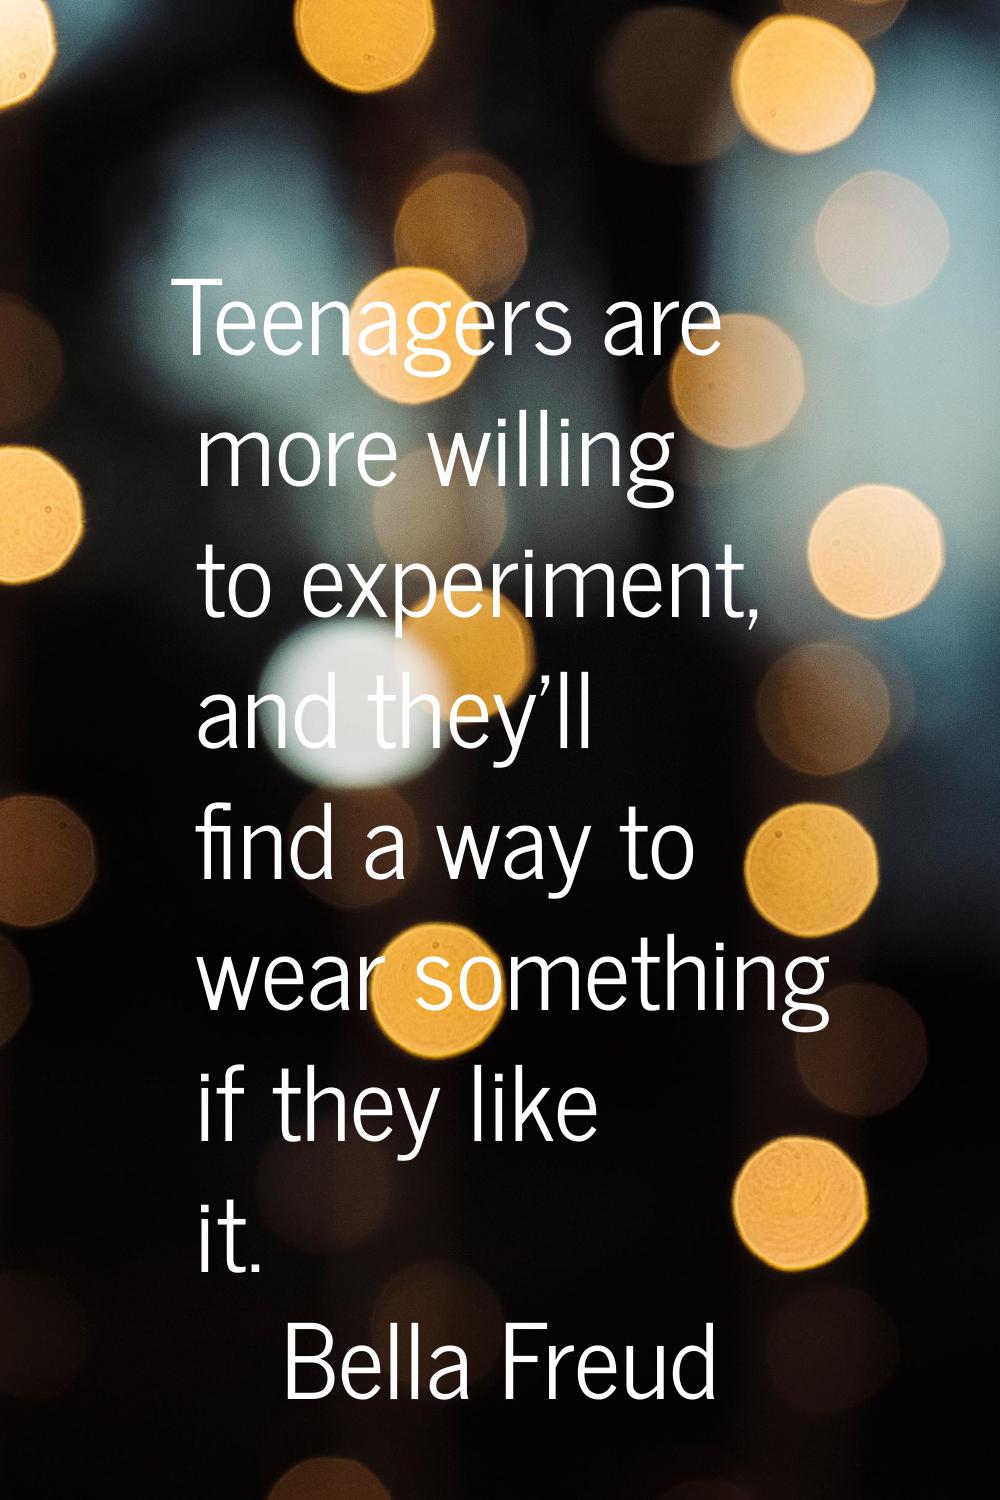 Teenagers are more willing to experiment, and they'll find a way to wear something if they like it.